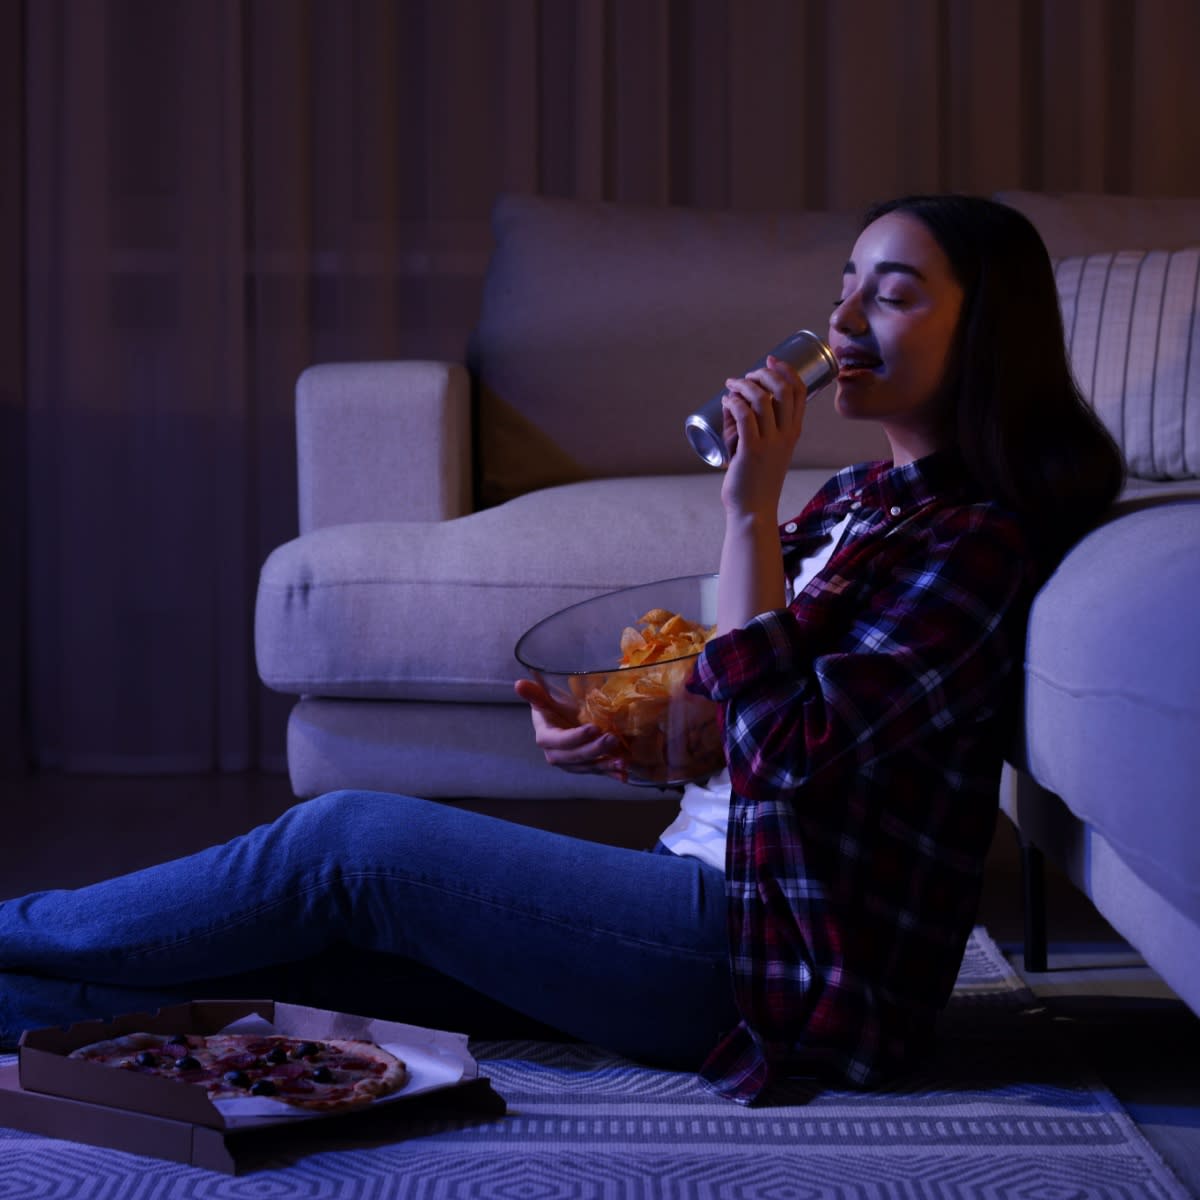 woman drinking from can and eating pizza at night